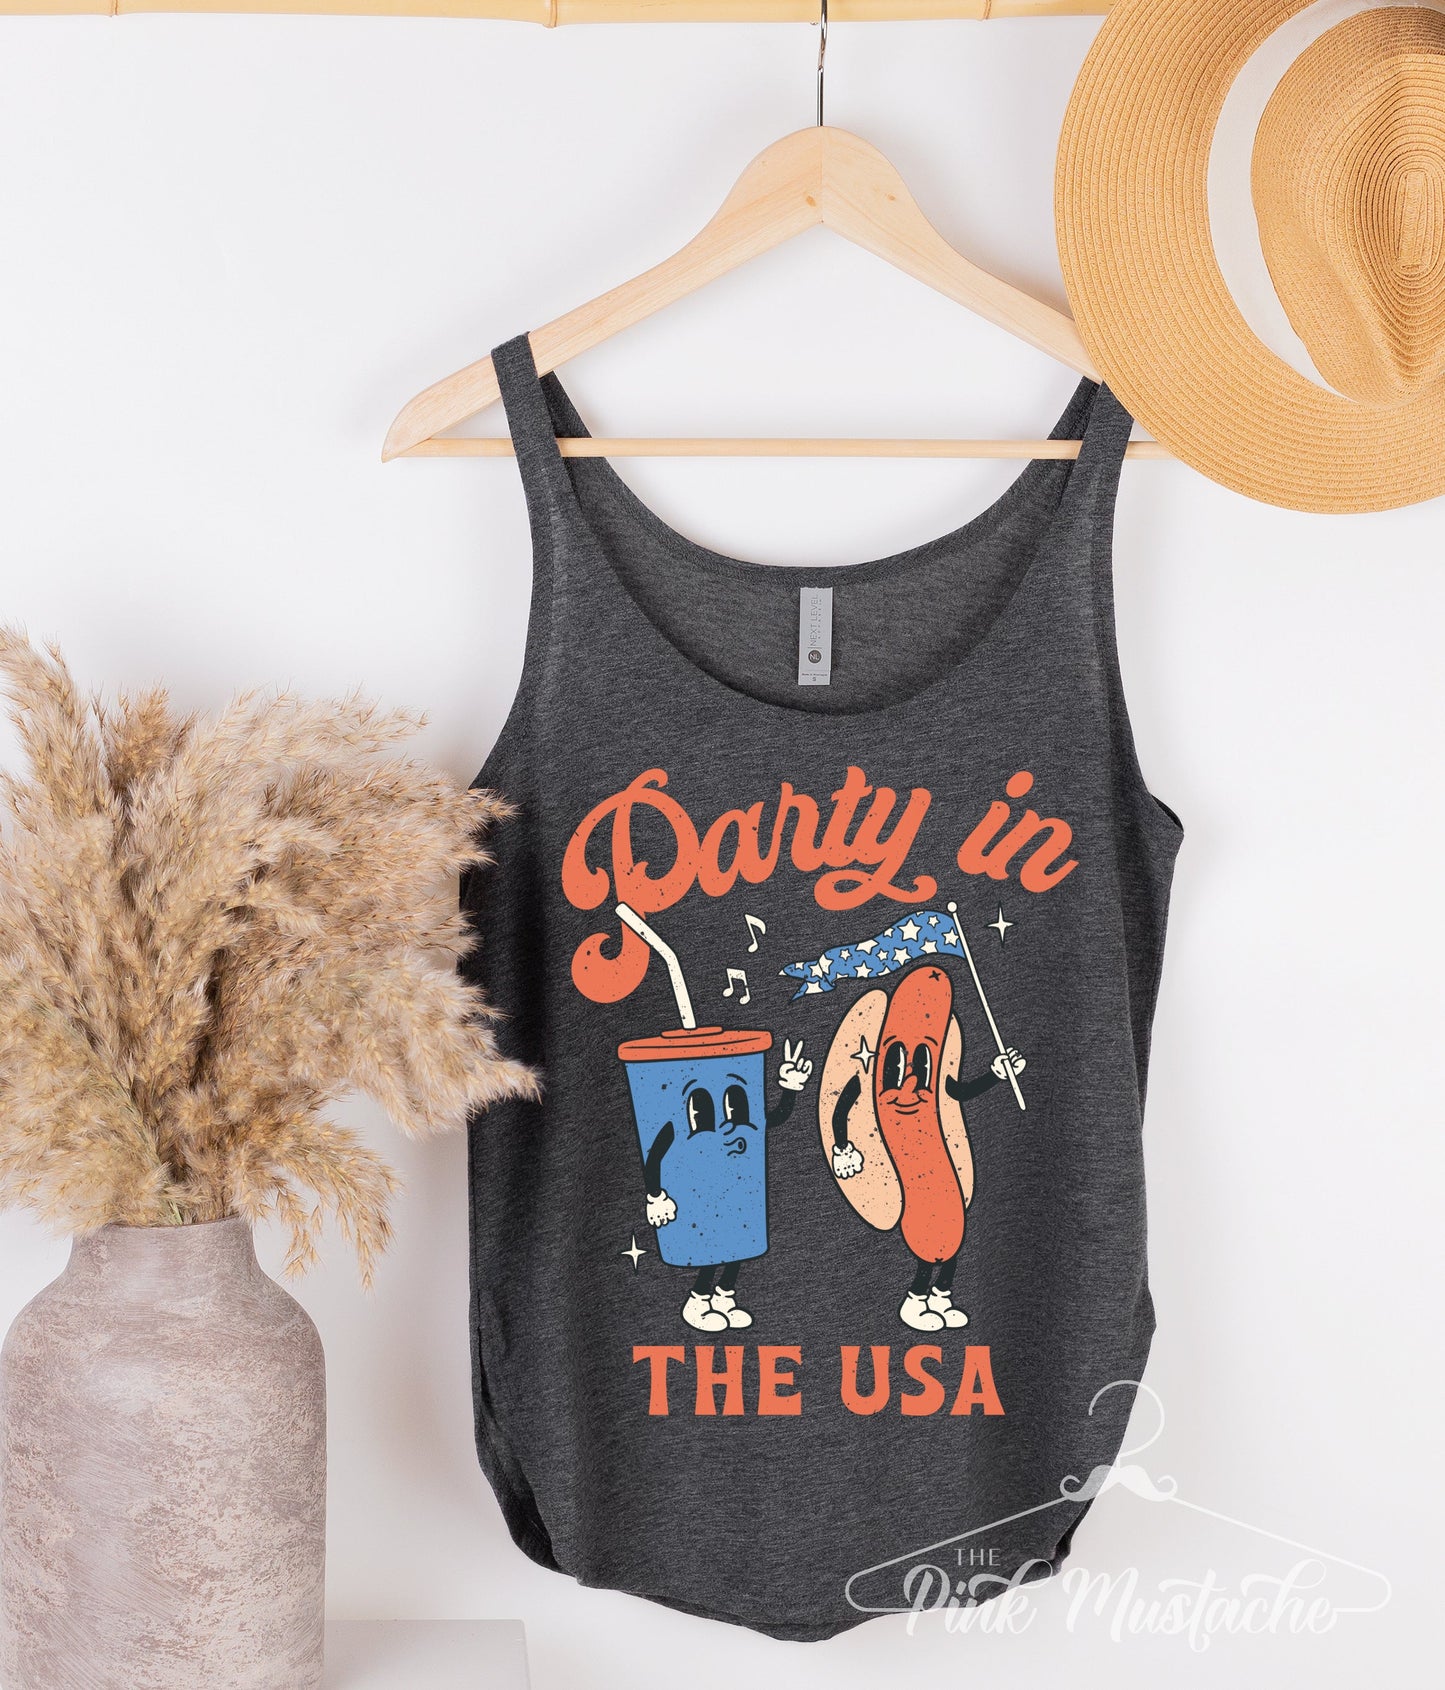 Party In The USA tanks/ July 4th Youth and Adult Tank / Memorial Day July 4th Tee/ Retro Style Shirt